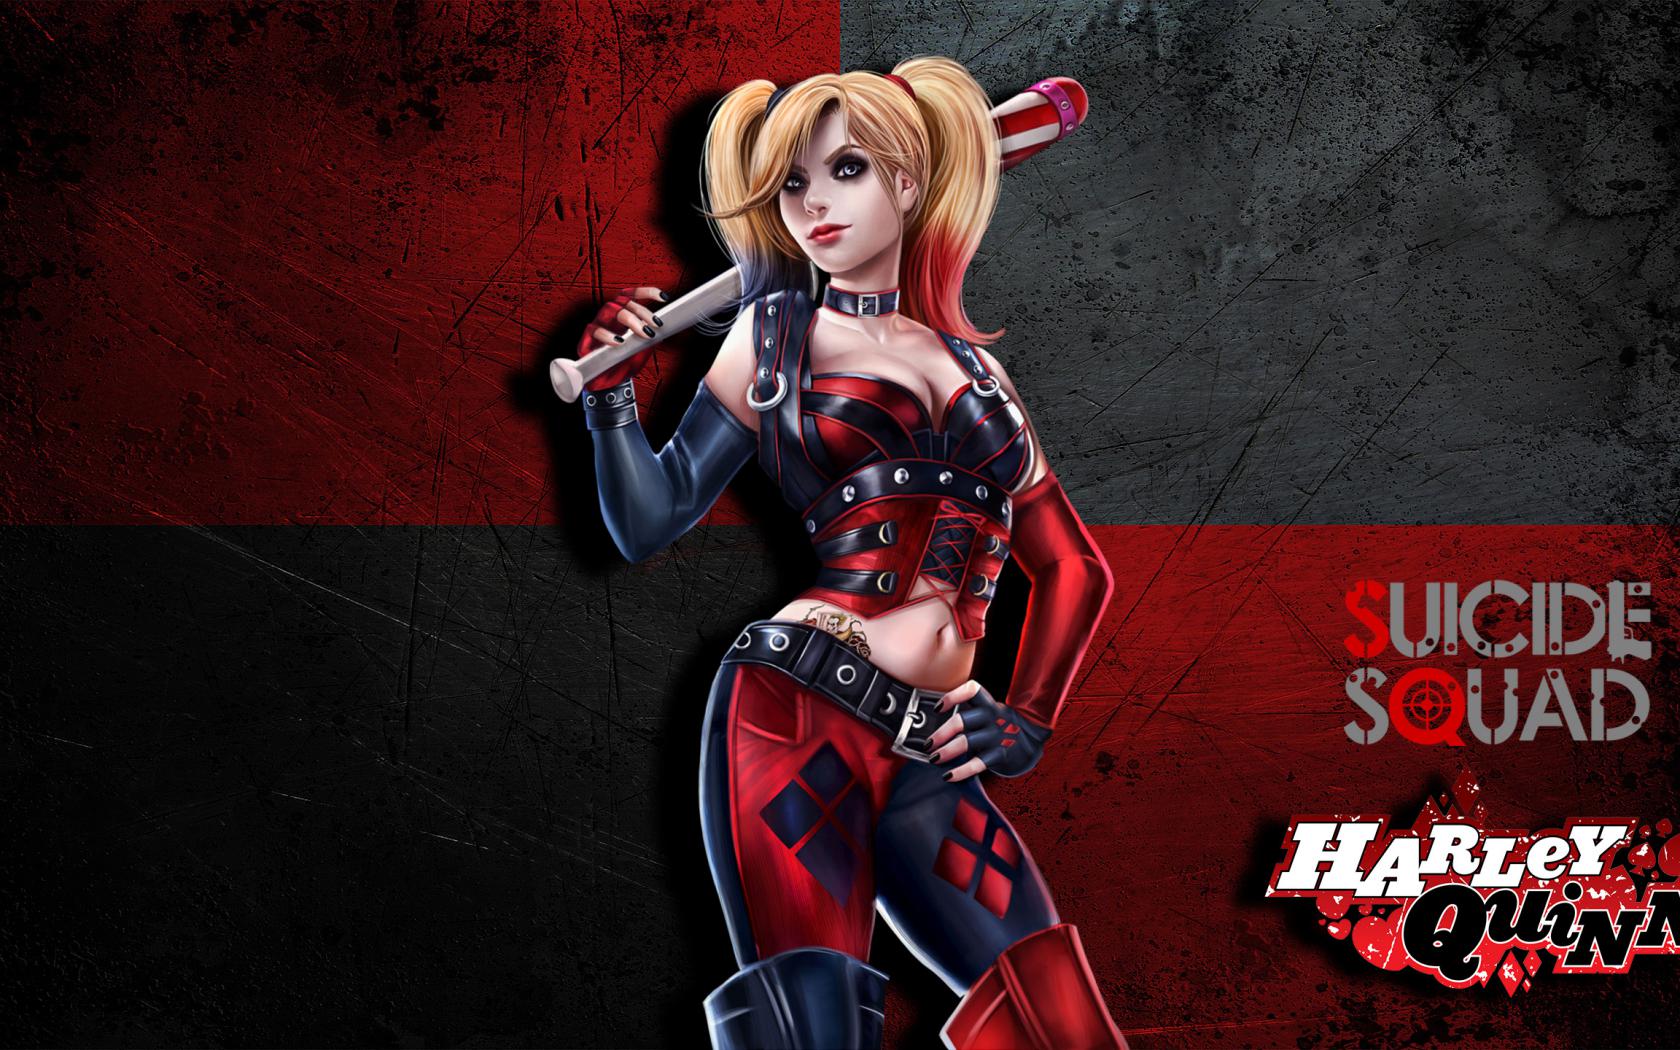  Squad 2016 Movie wallpaper Harley Quinn HD Wallpapers for Free